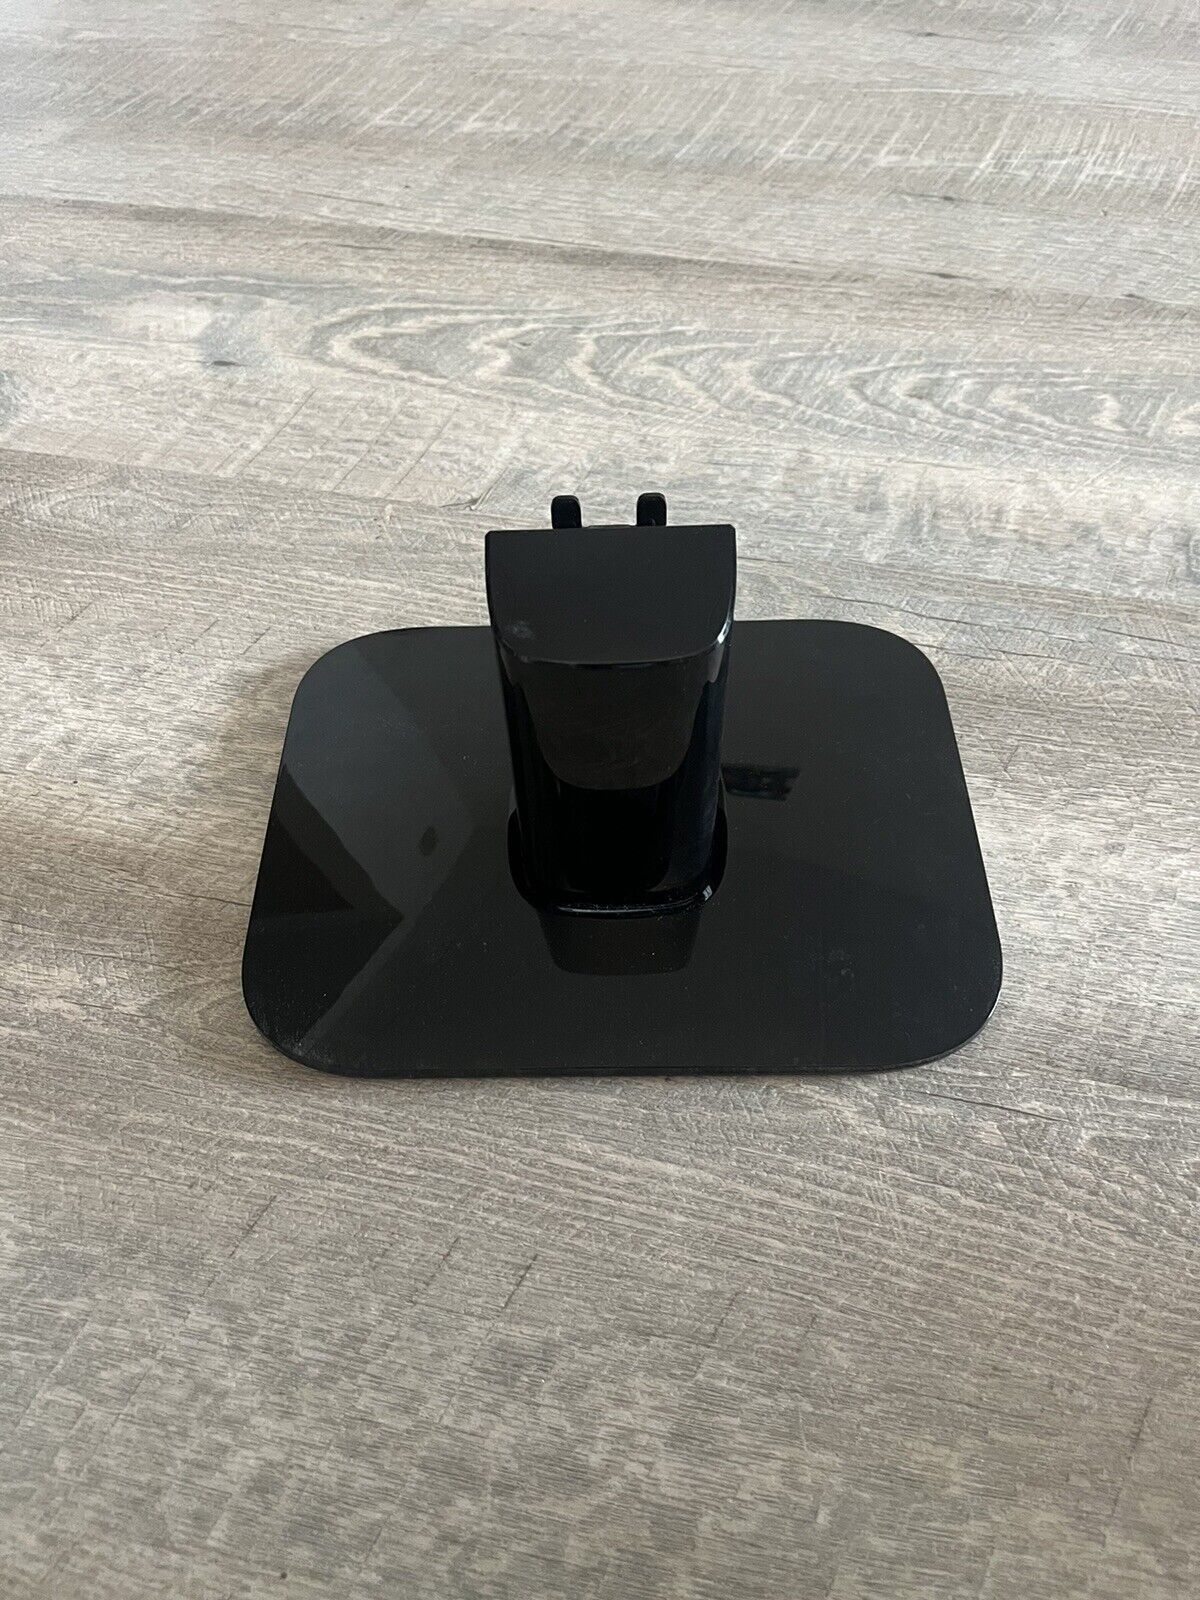 Acer KB272 Monitor Stand